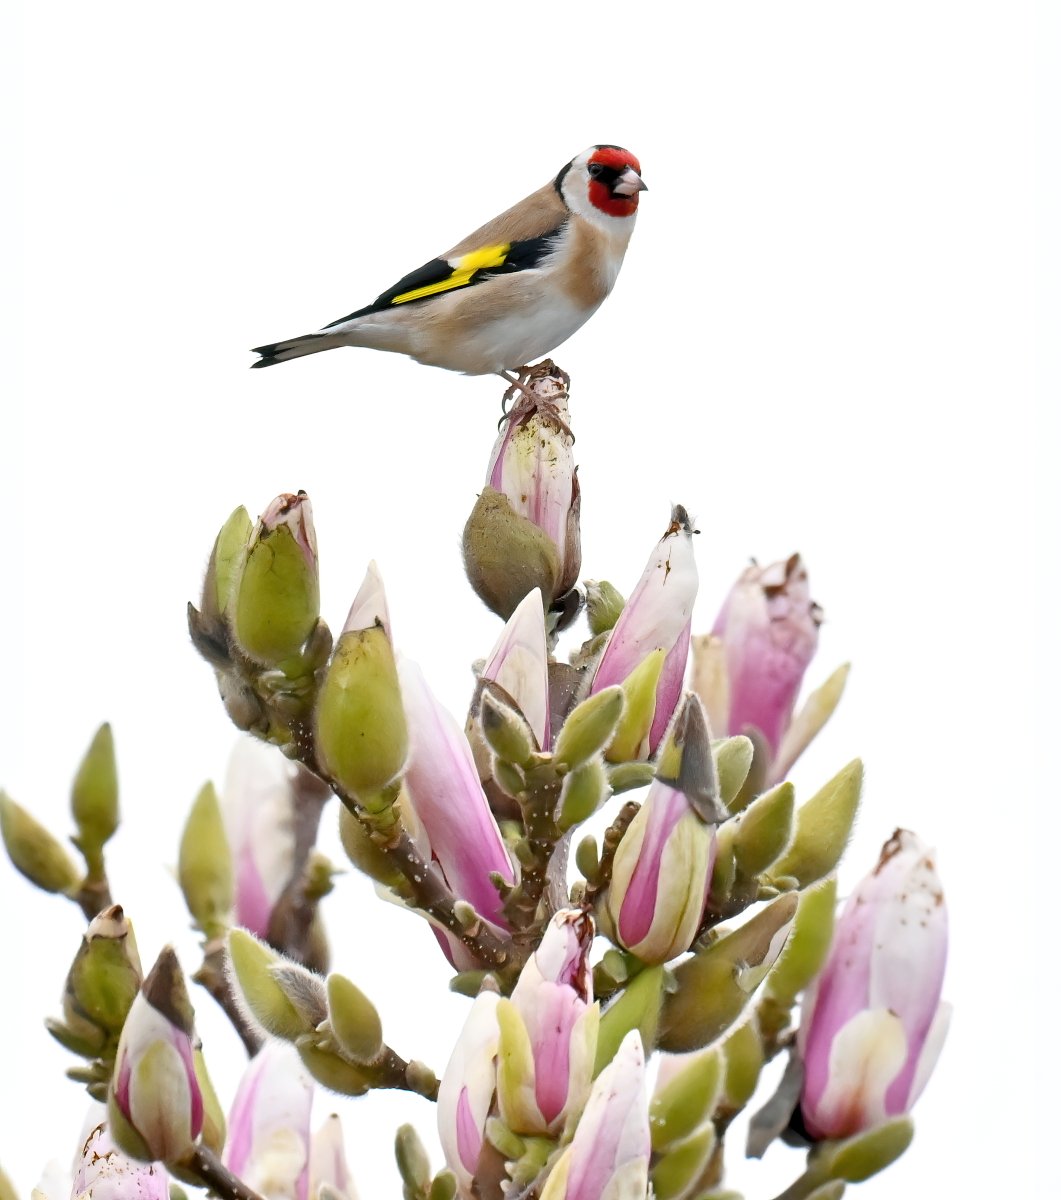 Another Goldfinch in Magnolia. 😀🐦